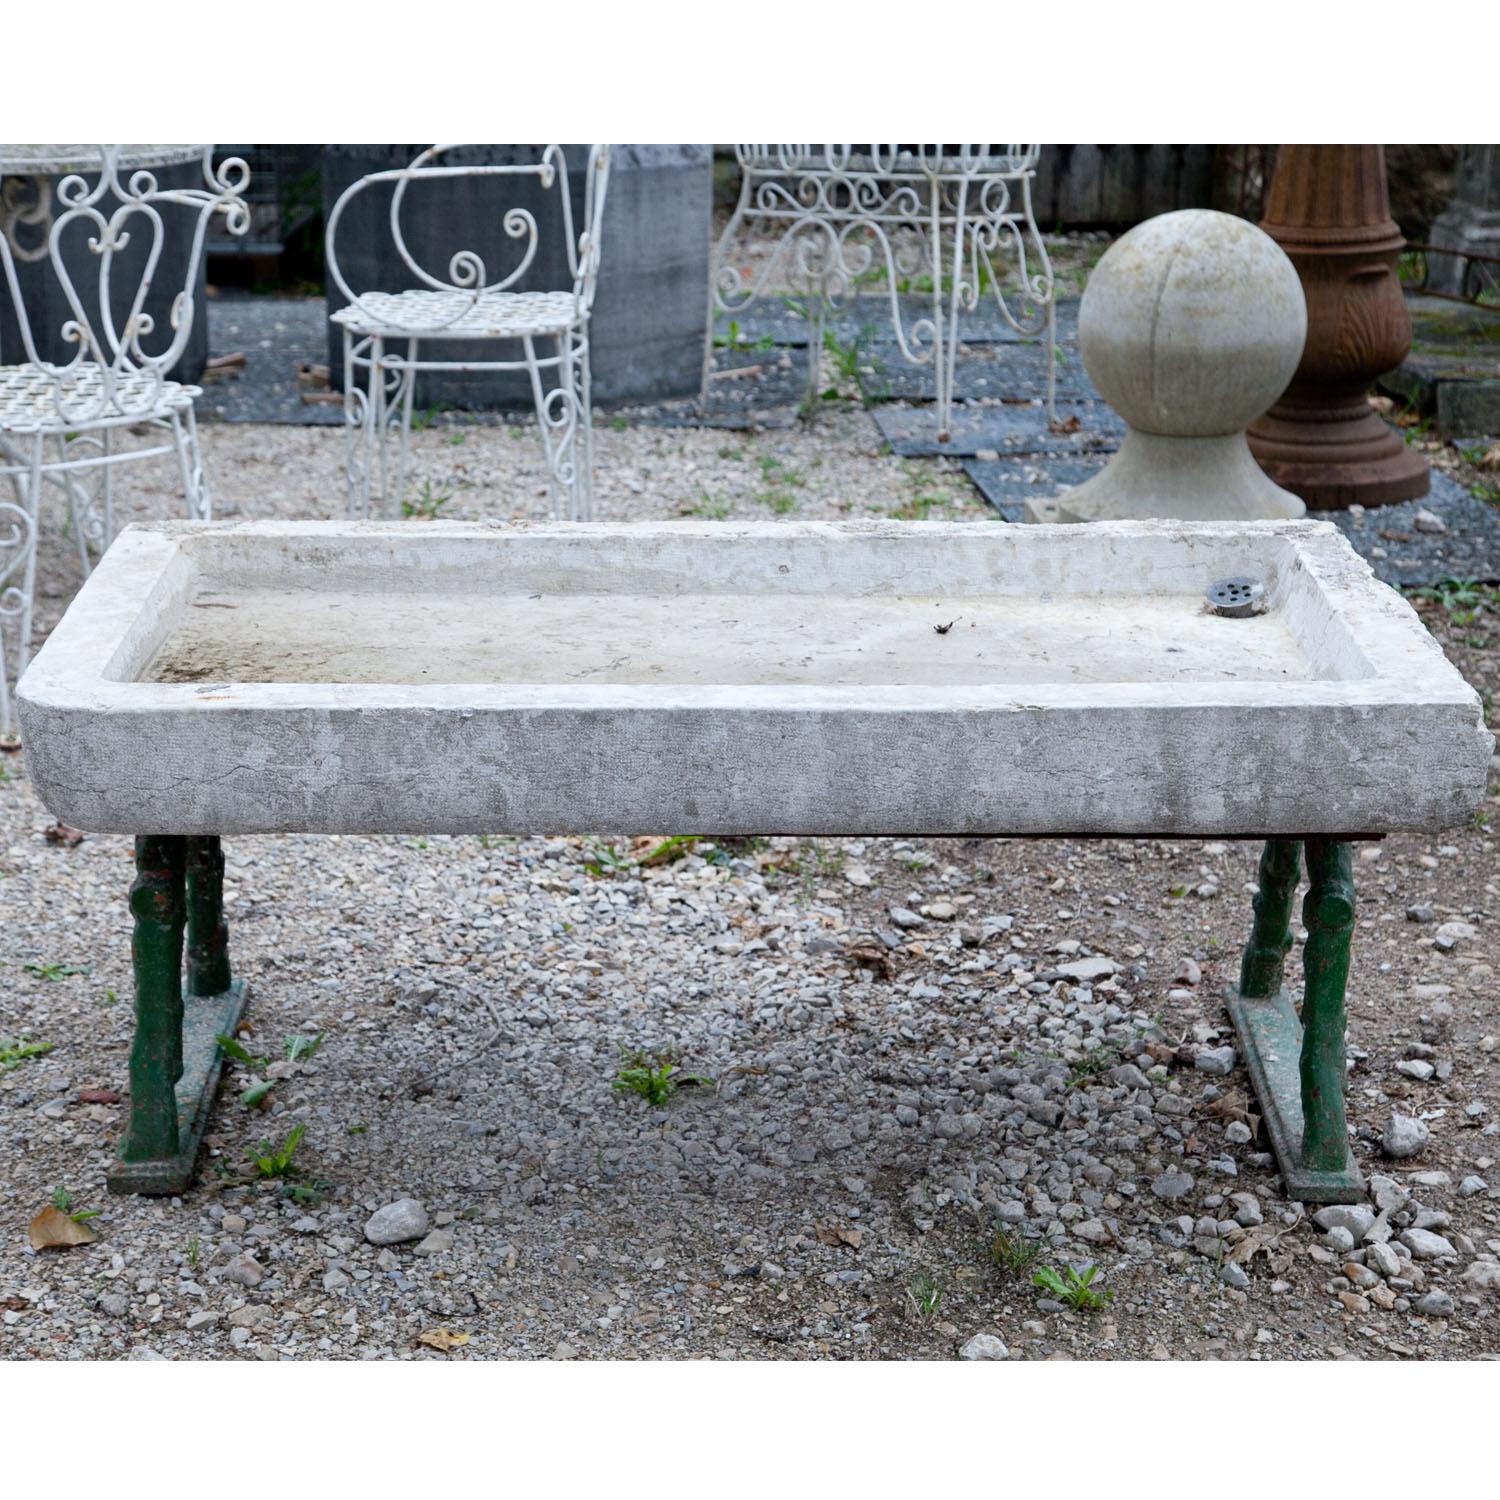 Large marble sink with a rectangular shape and a low rim.